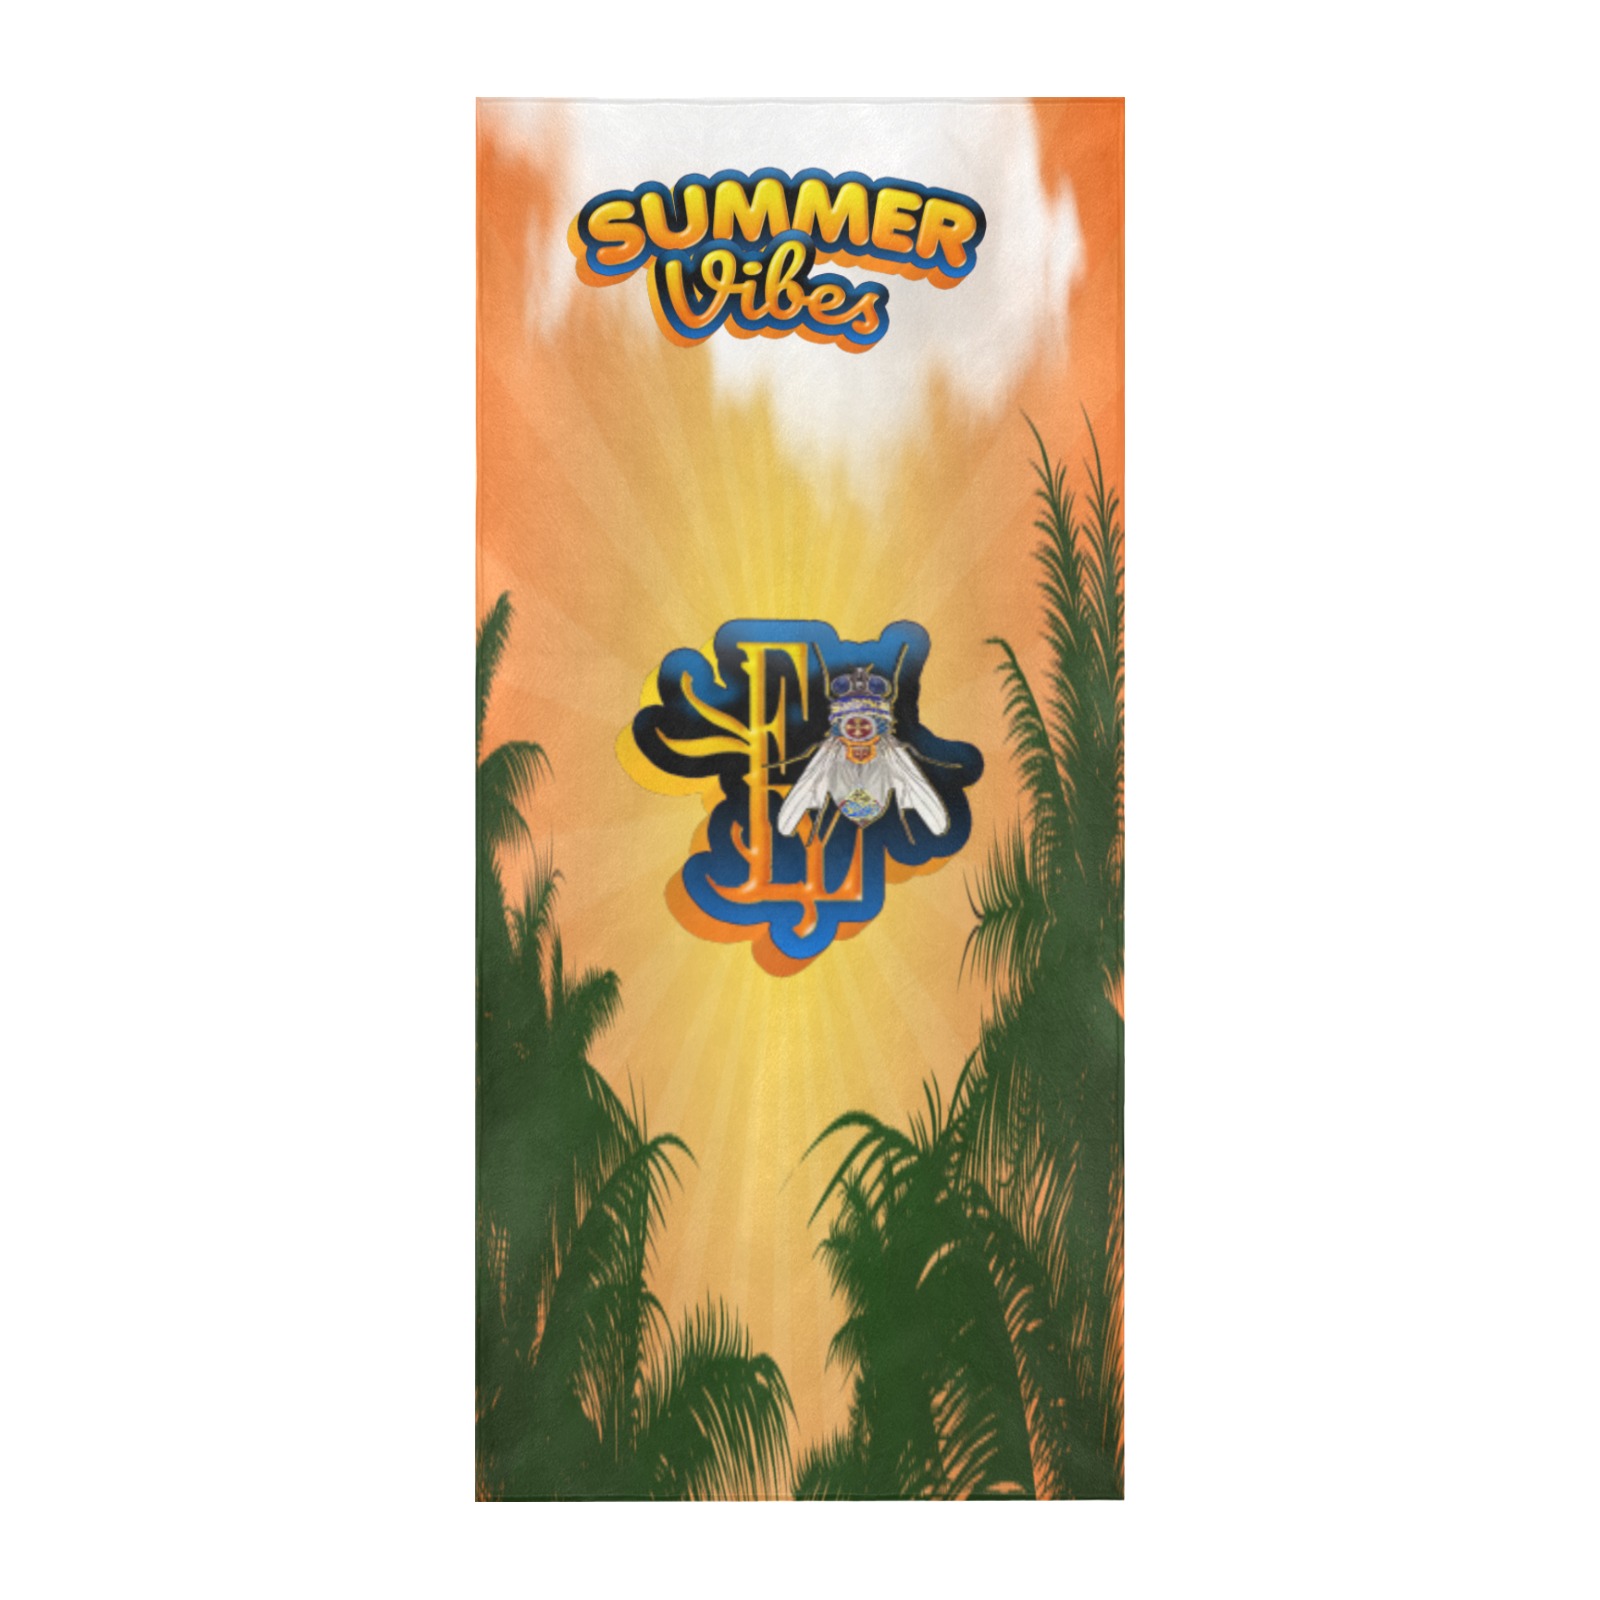 Summer Vibe Collectable Fly Beach Towel 32"x 71"